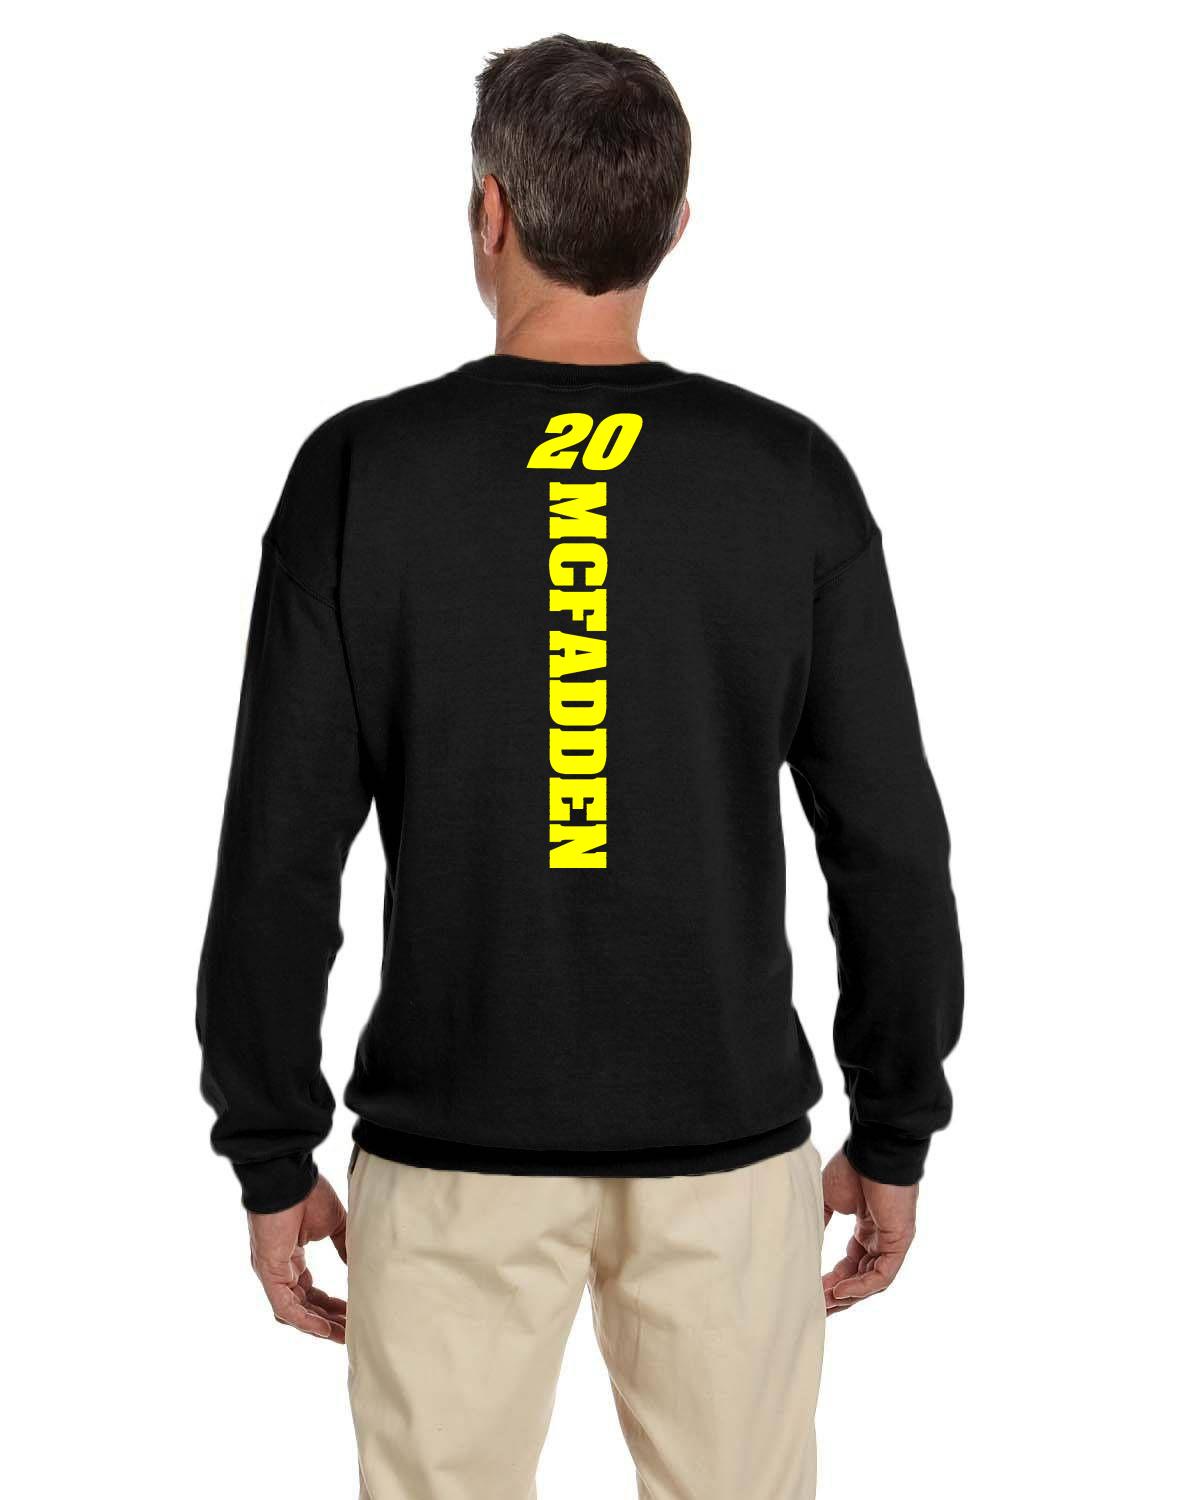 Cole McFadden / Grassroots Racing Name/number Crew neck